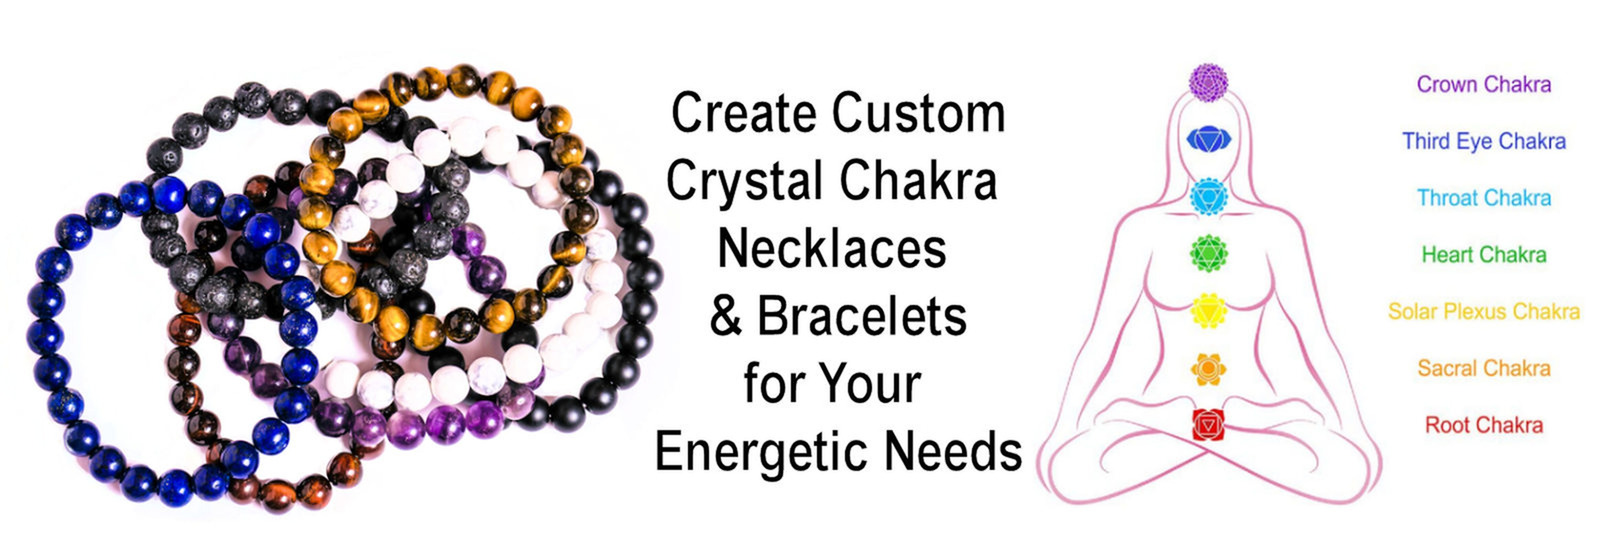 Create Custom Crystal Chakra Necklaces & Bracelets for Your Energetic Needs.